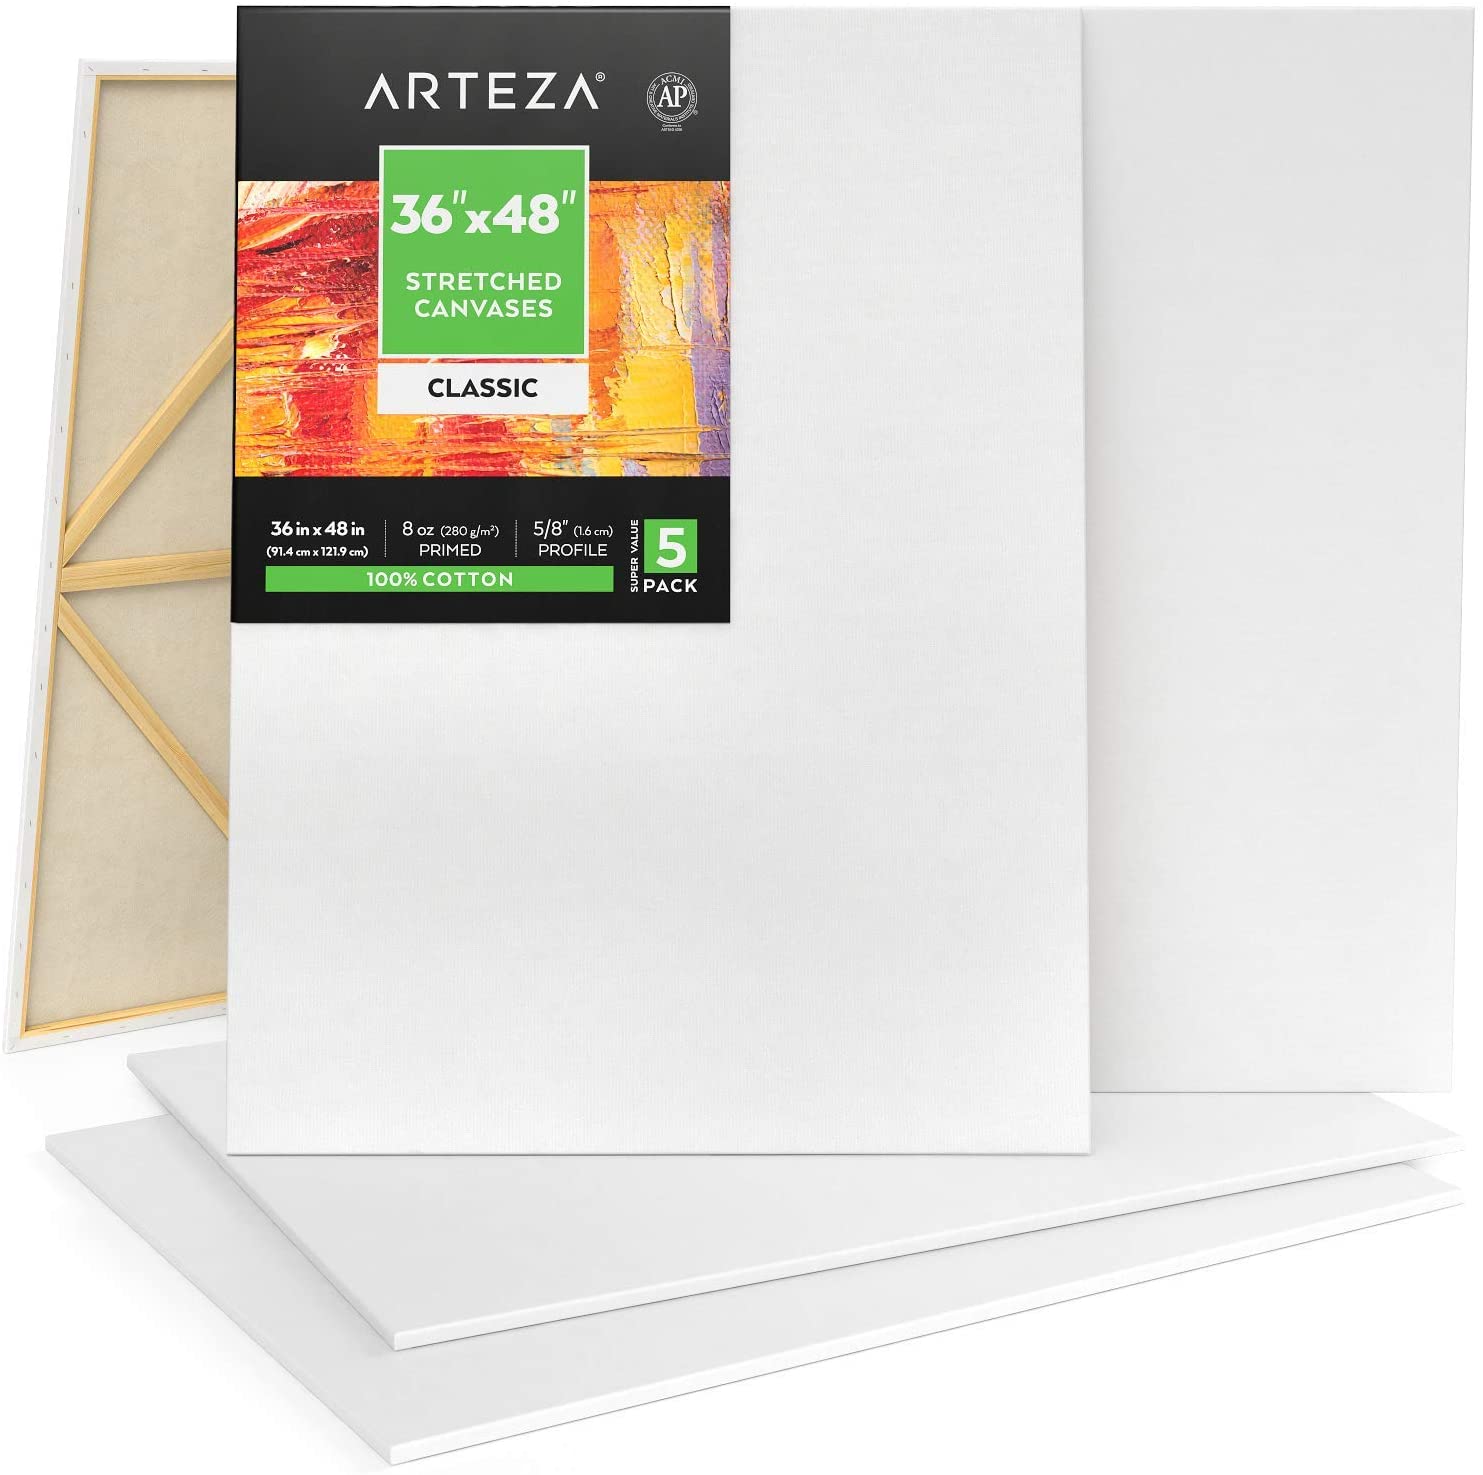 Arteza Stretched Canvas Value Pack, Classic, 36 x 48, Blank Canvas Boards  for Painting - 5 Pack